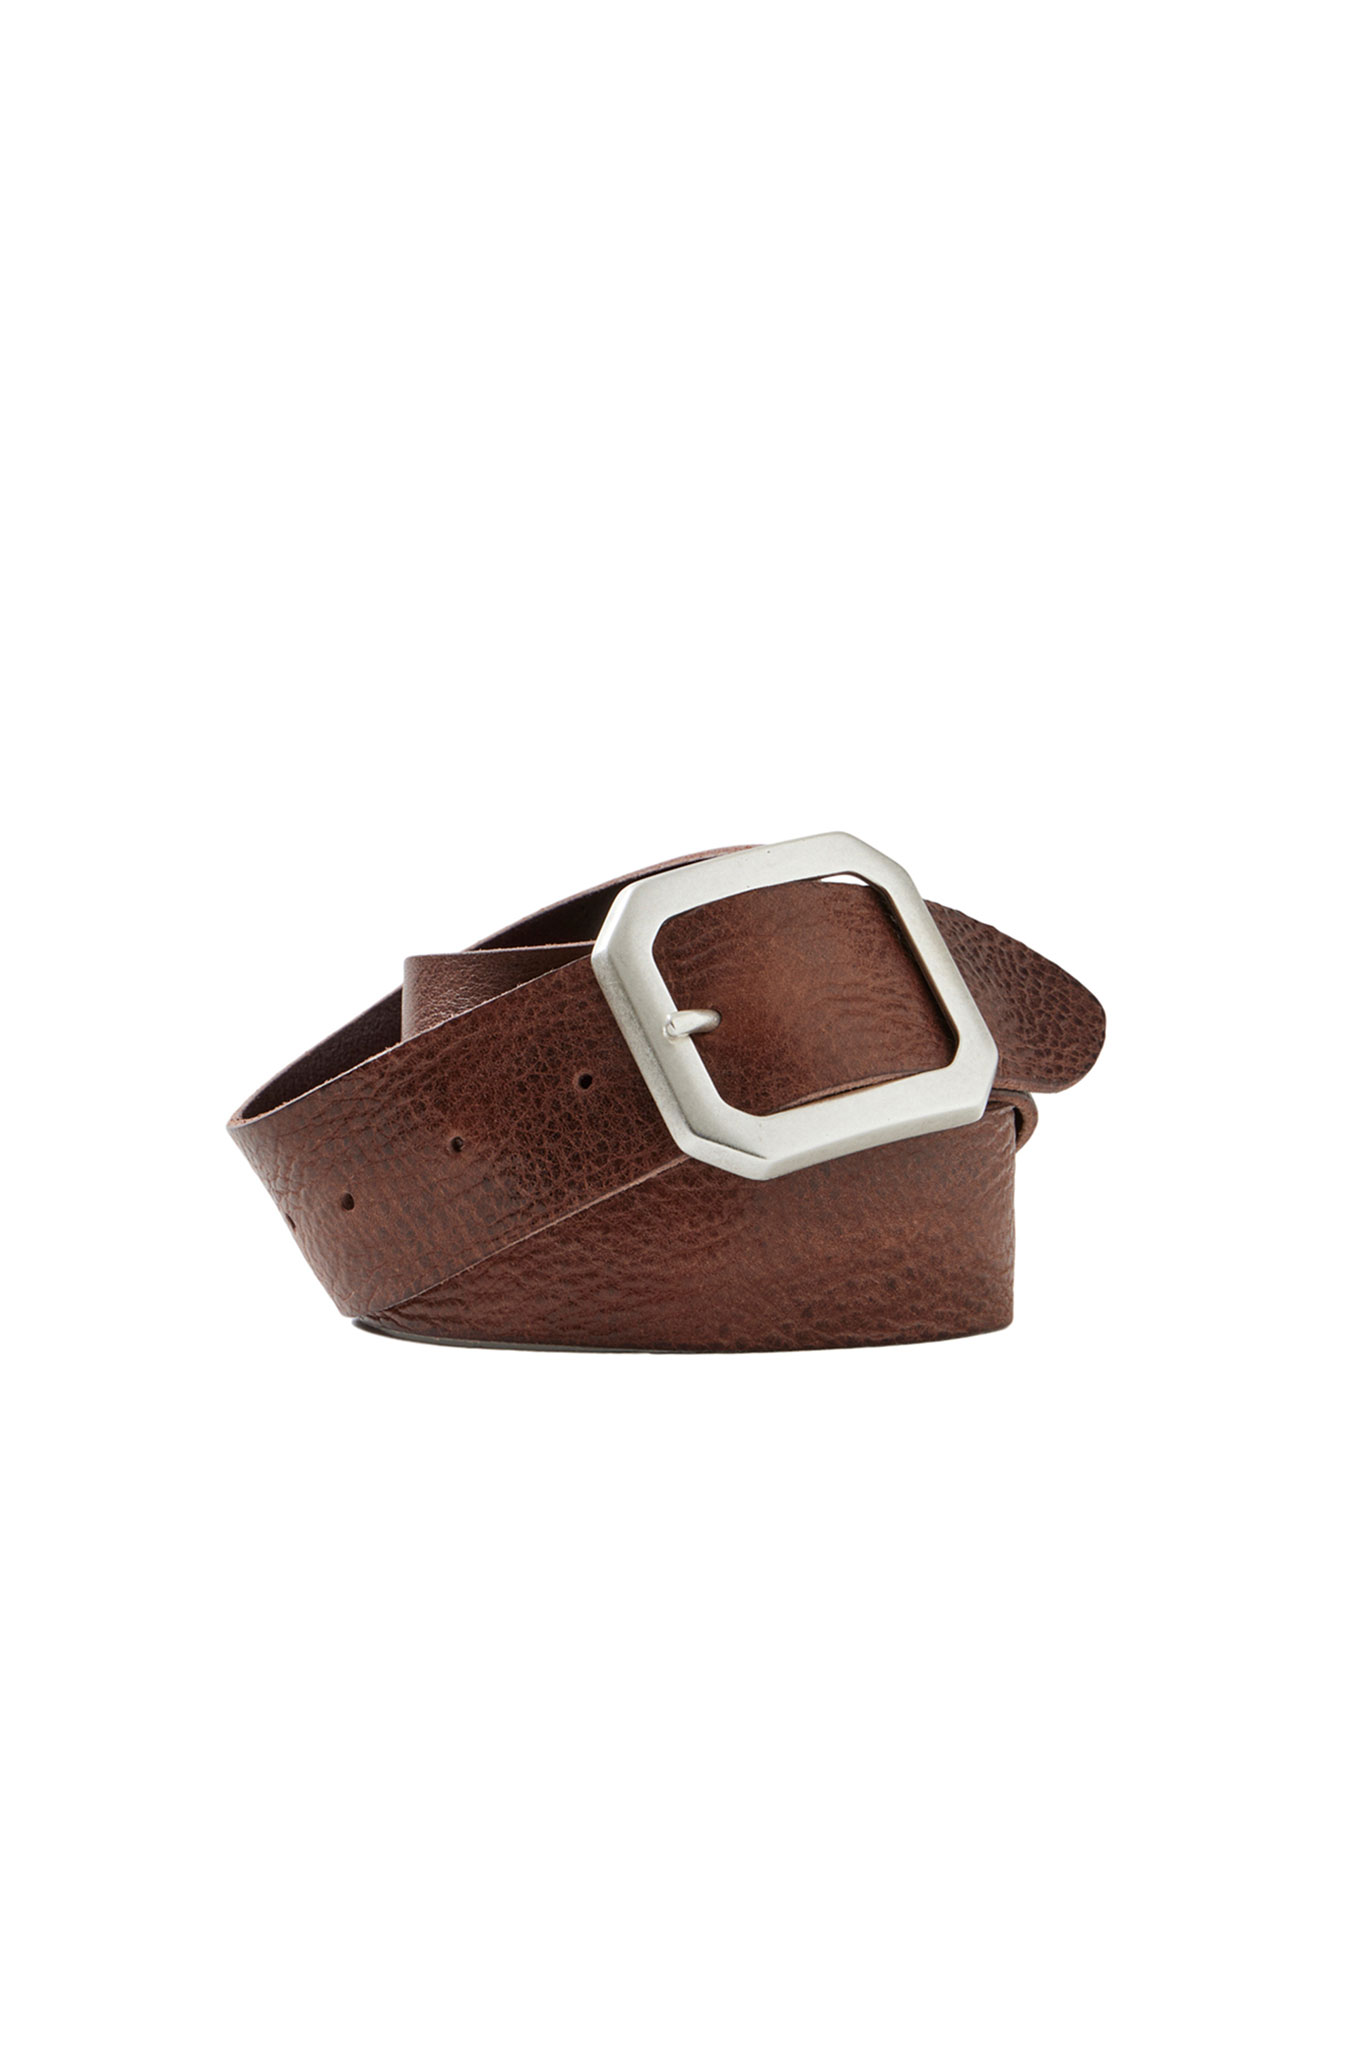 Hardin 40mm Brown Leather Belt with Removable Octagonal Buckle